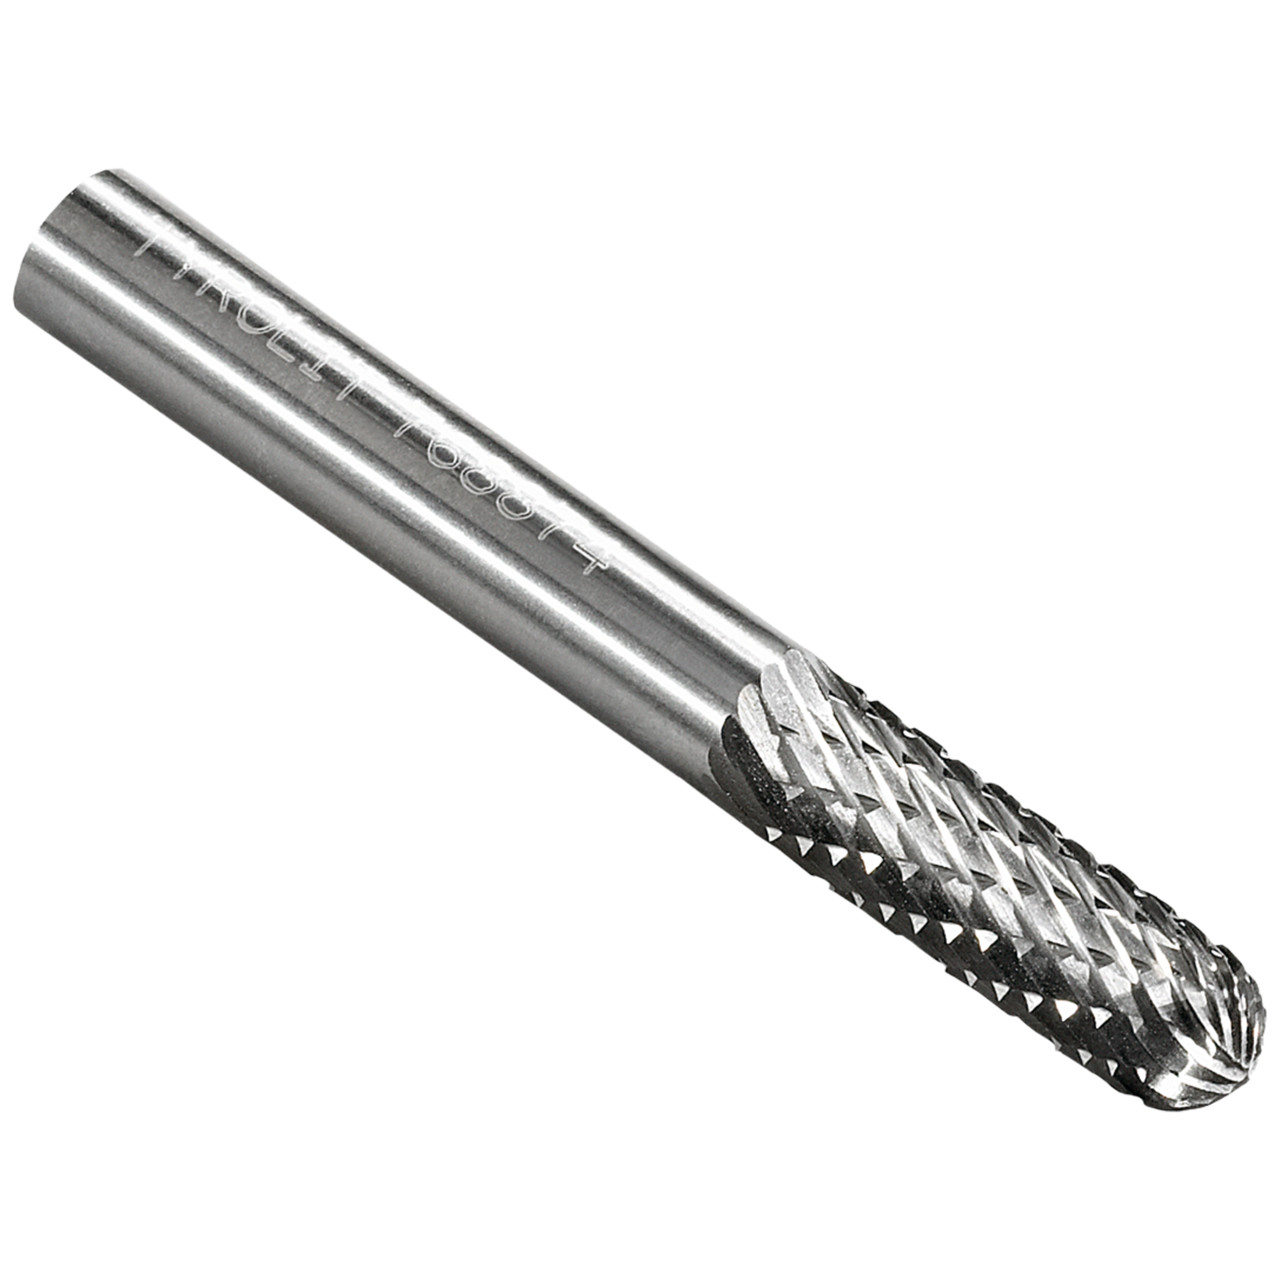 TYROLIT carbide end mill DxT-SxL 3x13-3x38 For cast iron, steel and stainless steel, shape: 52WRC - cylindrical, Art. 766126